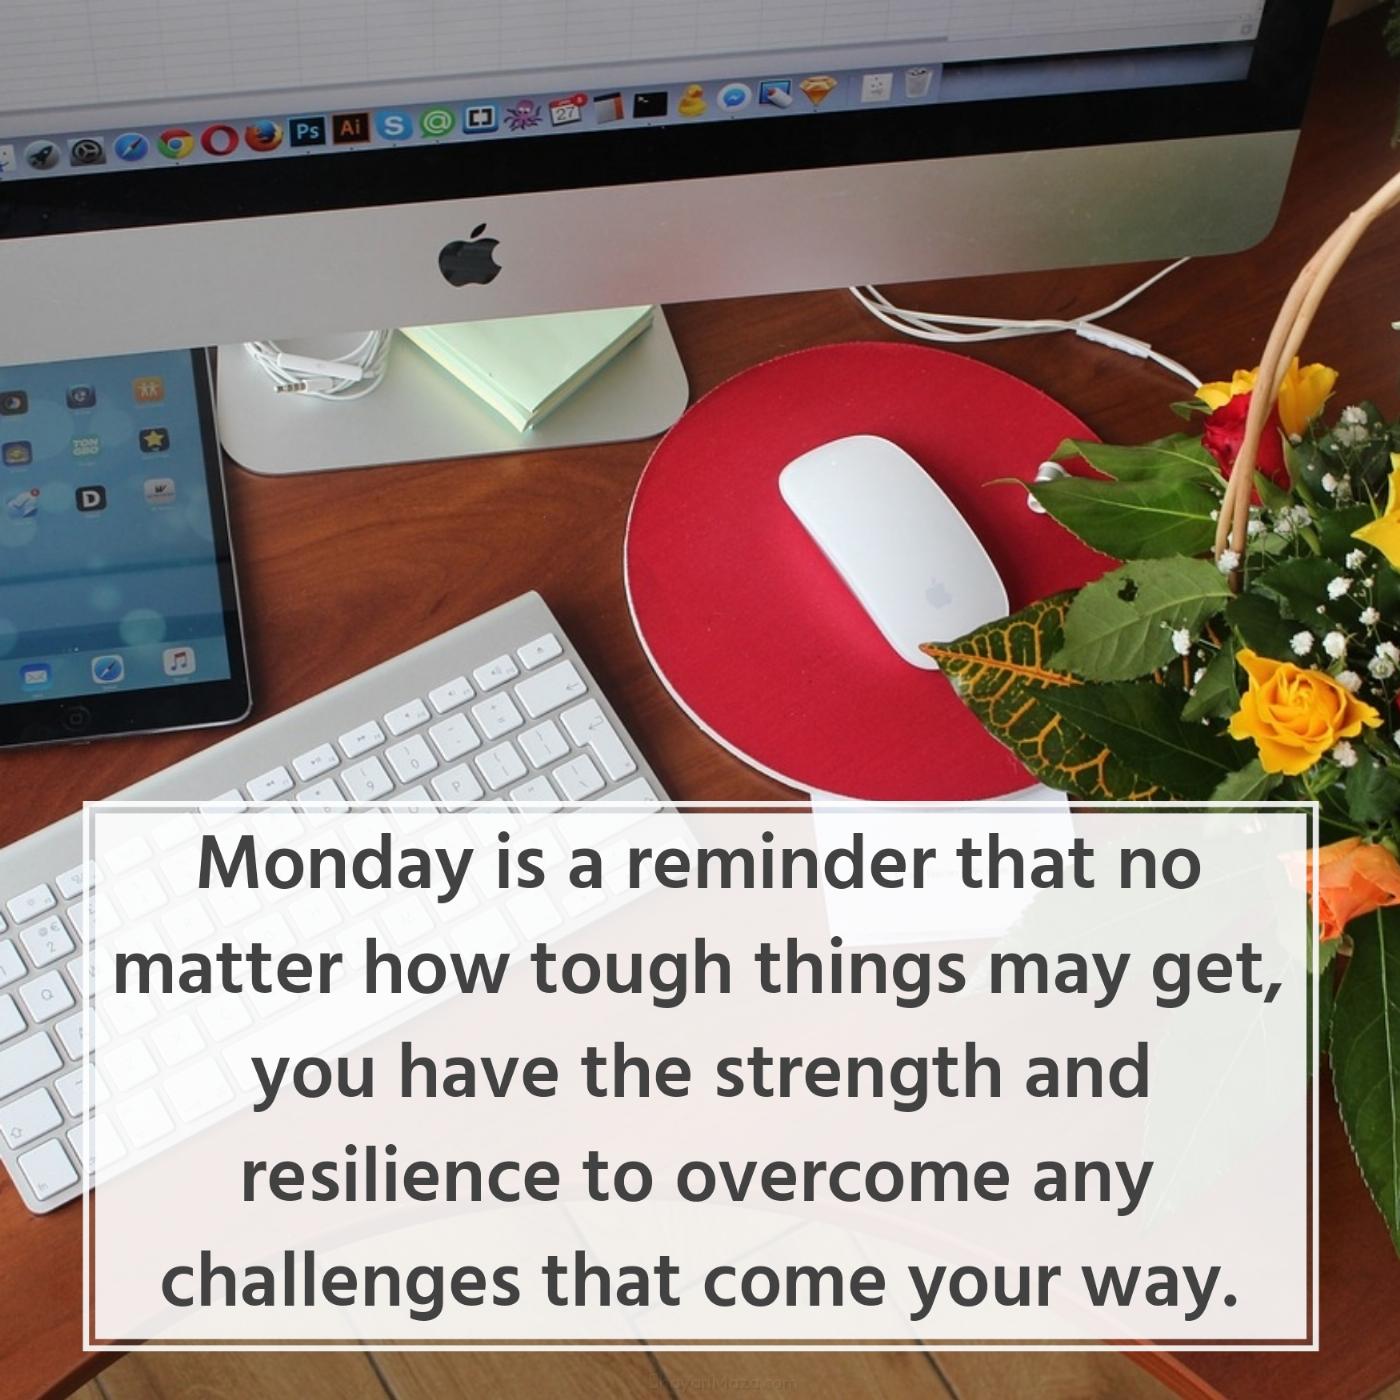 Monday is a reminder that no matter how tough things may get